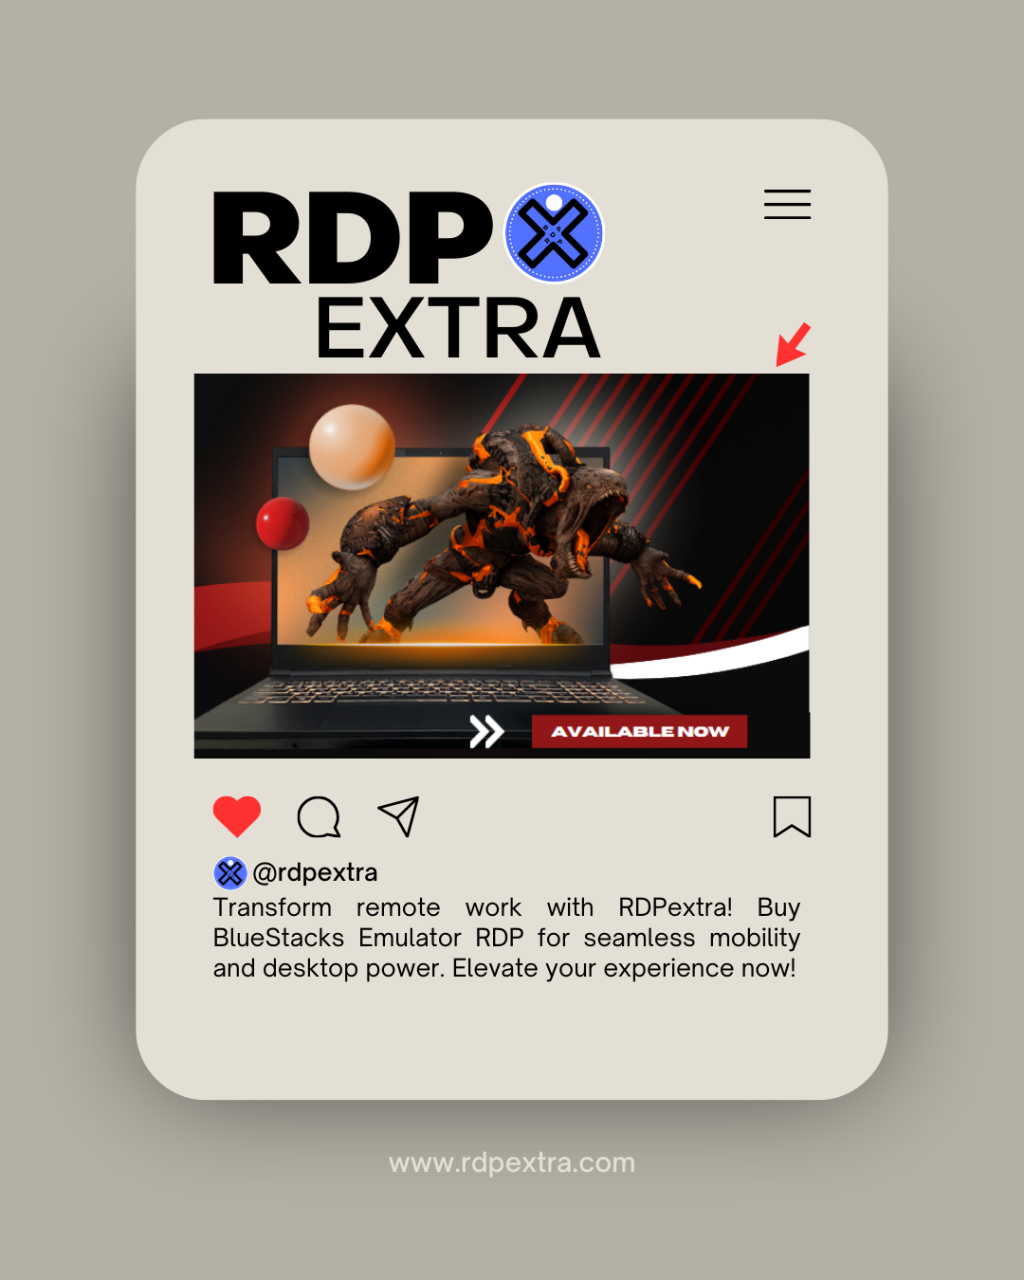 Elevate Your Remote Experience: Buy BlueStacks Emulator RDP Services from RDPextra.com